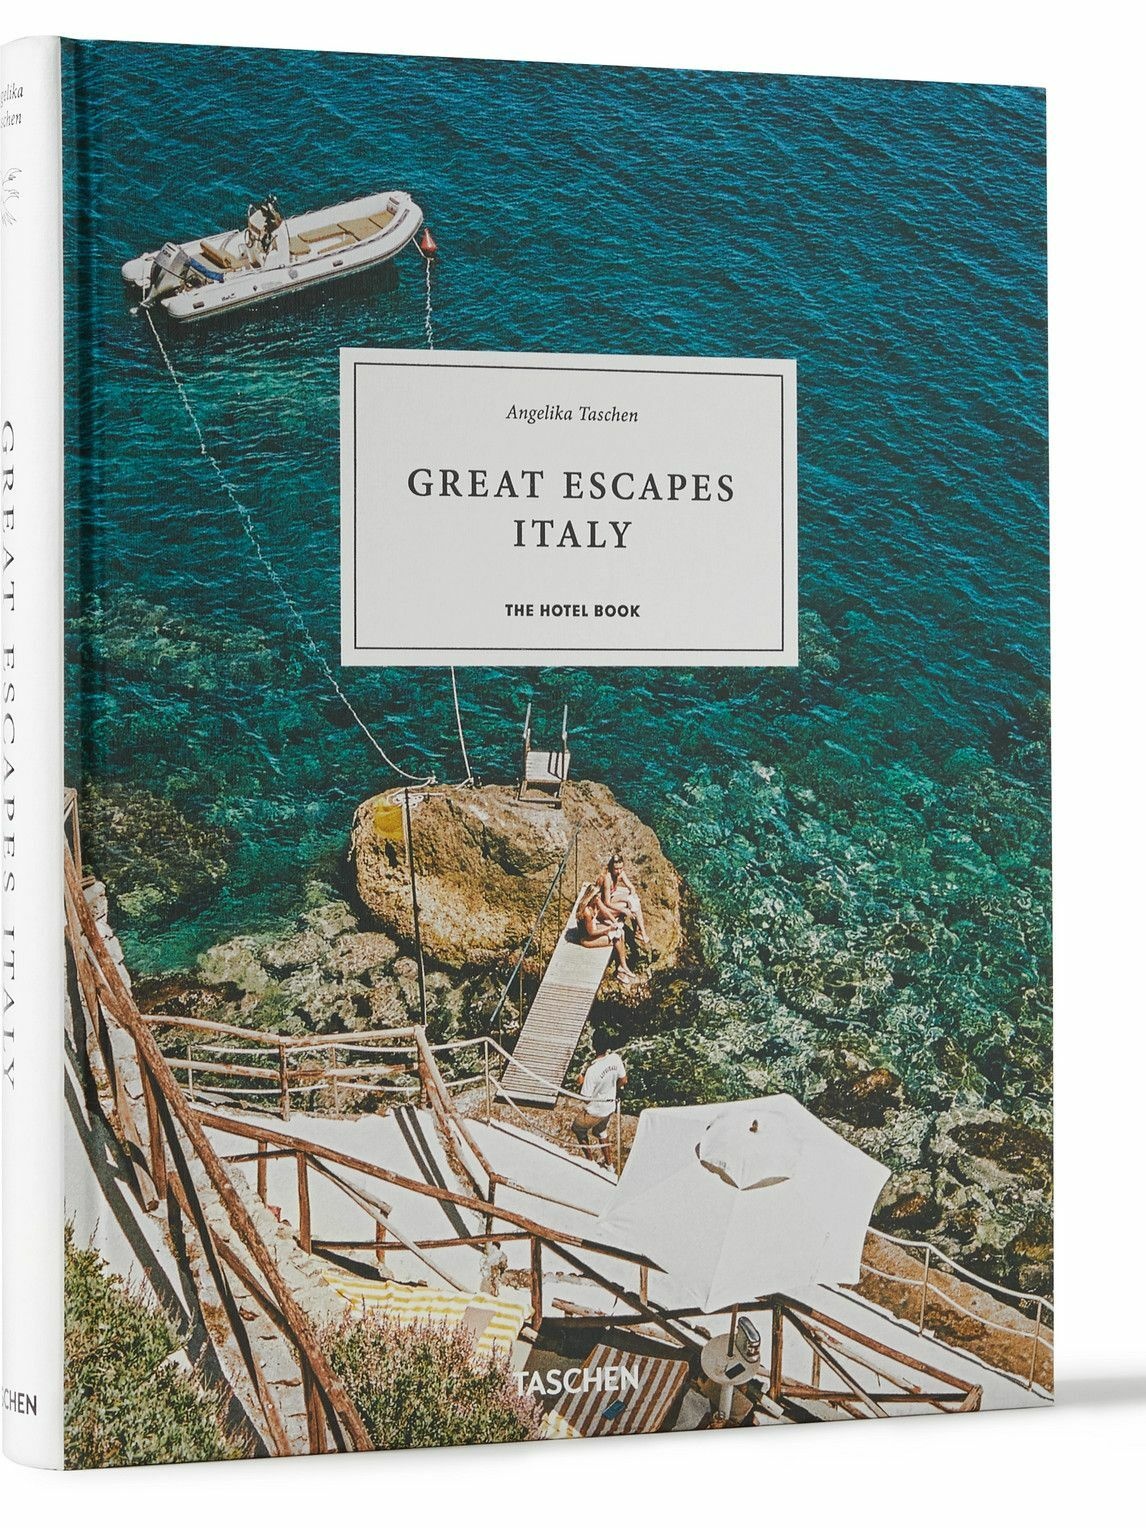 Photo: Taschen - The Hotel Book: Great Escapes Italy Hardcover Book